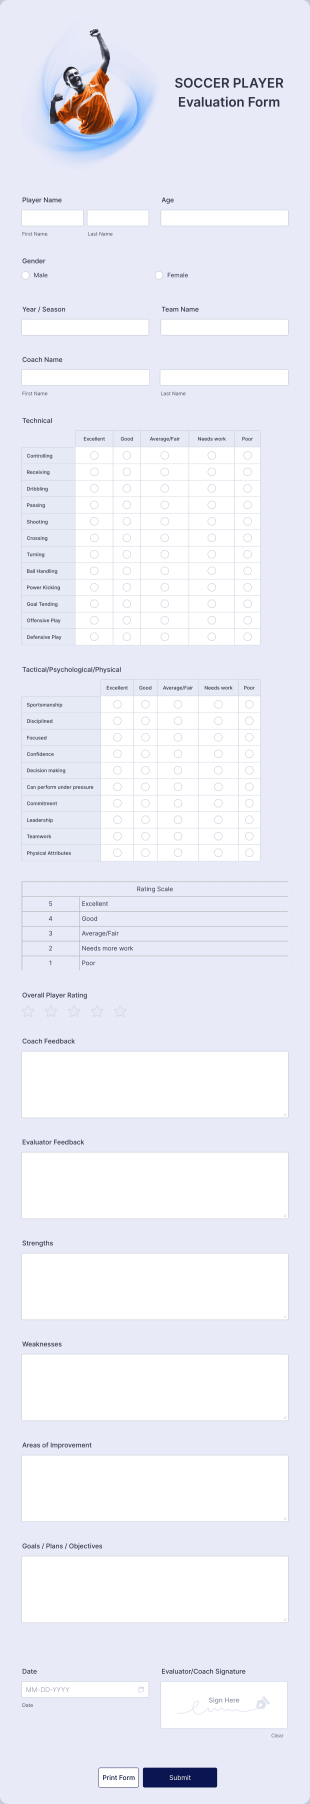 Soccer Player Evaluation Form Template